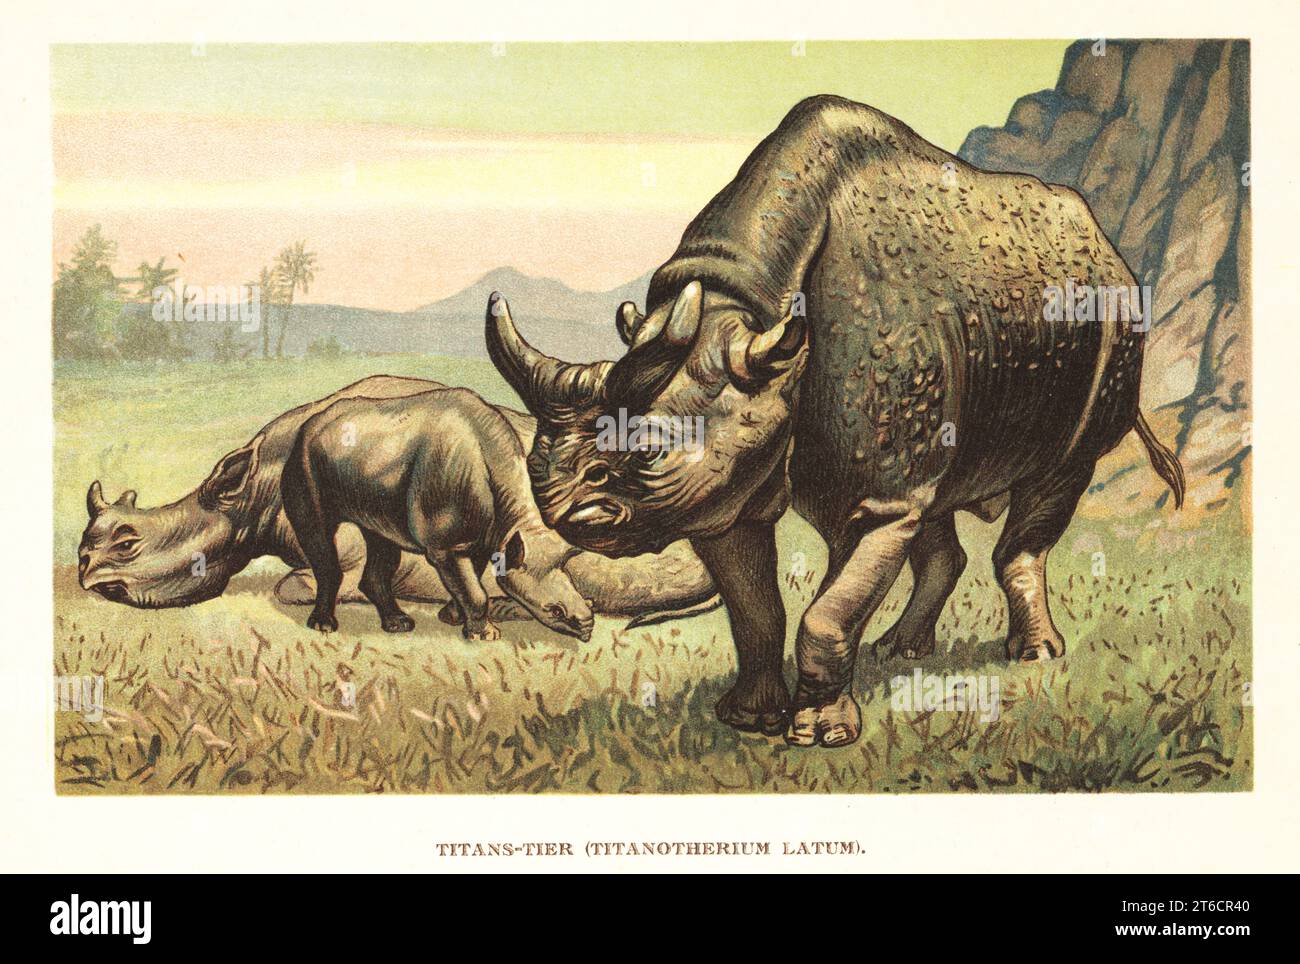 Megacerops, extinct genus of odd-toed ungulates, rhinoceros-like browsers, endemic to North America during the Late Eocene. After a reconstruction by Professor Henry Fairfield Osborn of New York. Titanotherium elatum. Titans-tier, Titanotherium latum. Colour printed illustration by F. John from Wilhelm Bolsches Tiere der Urwelt (Animals of the Prehistoric World), Reichardt Cocoa company, Hamburg, 1908. Stock Photo